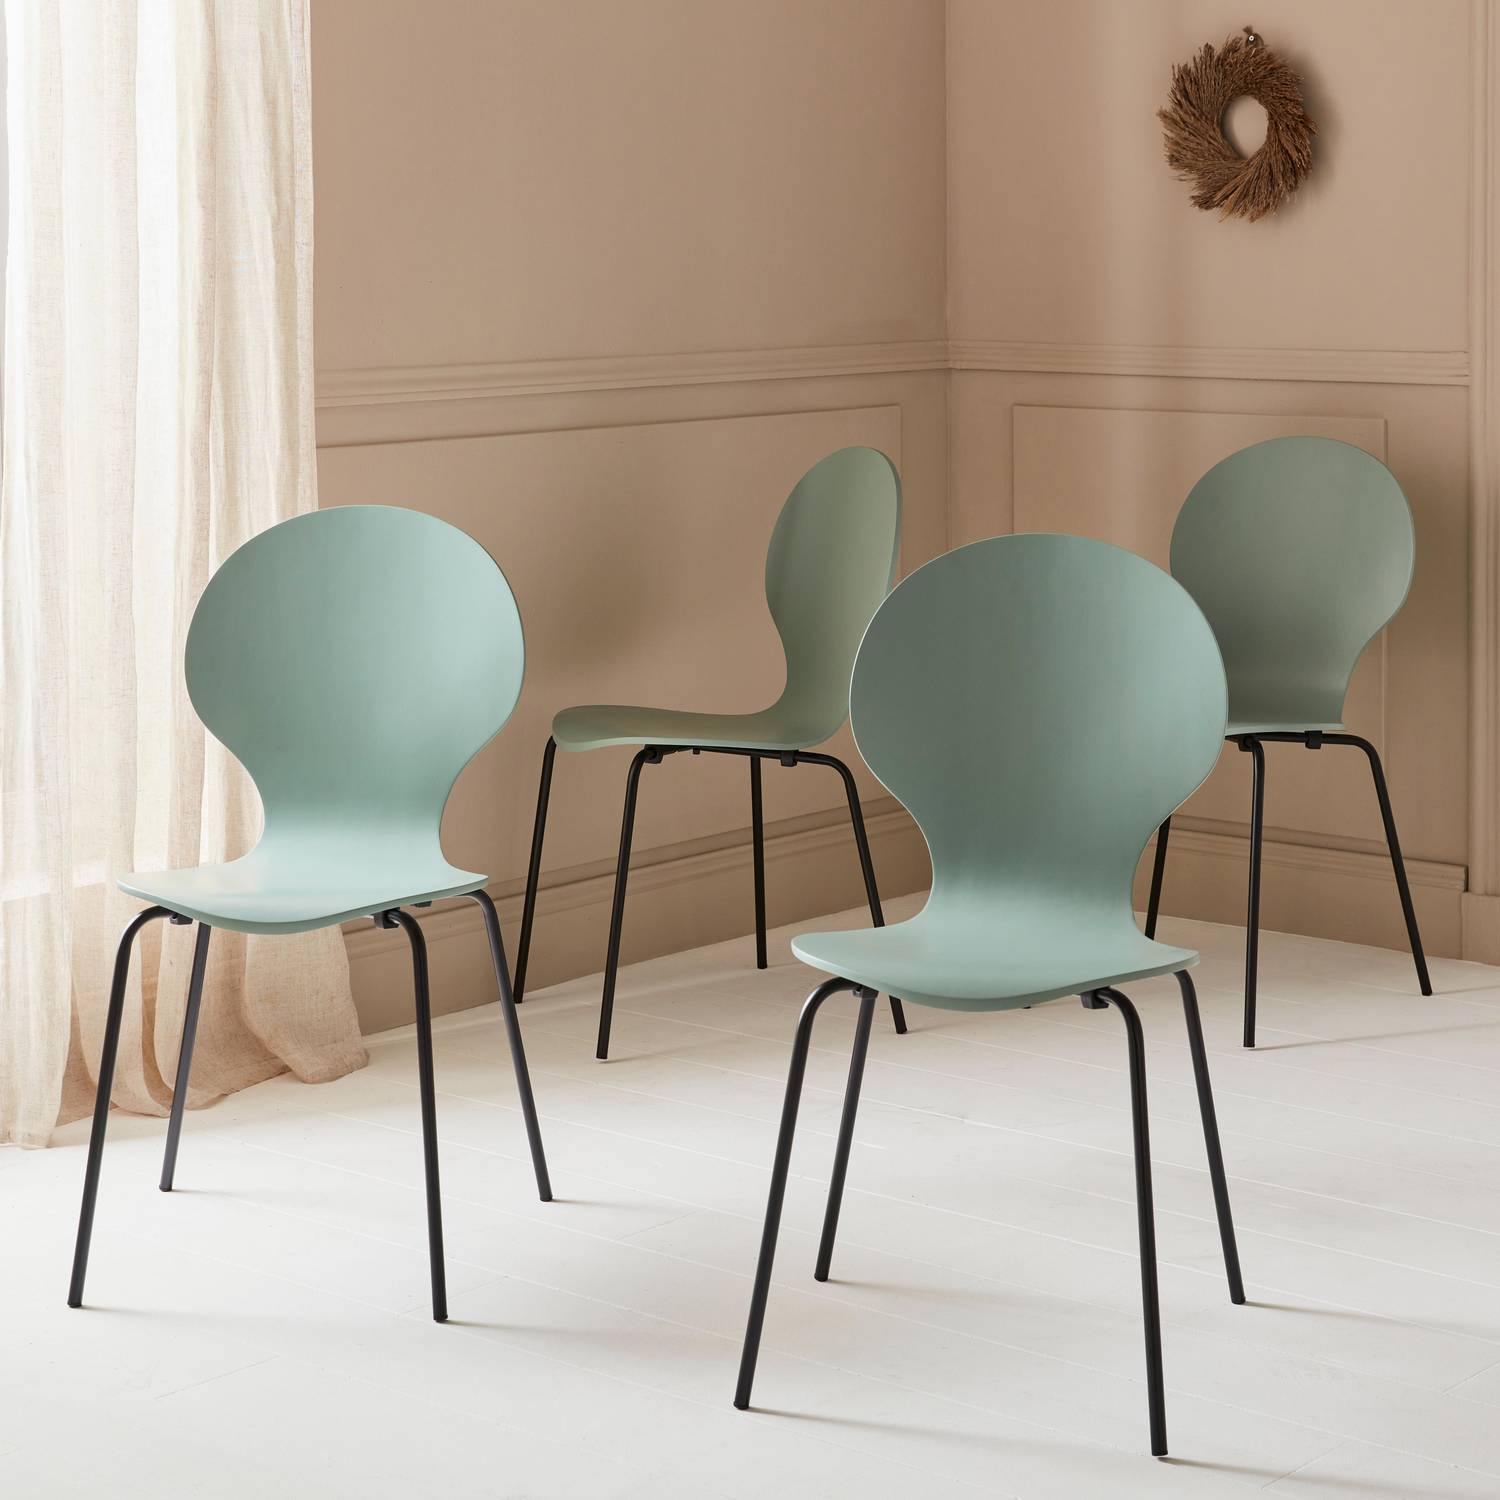 Set of 4 stackable Retro Chairs, Wood and Plywood, L43xW48xH87cm, green Photo1